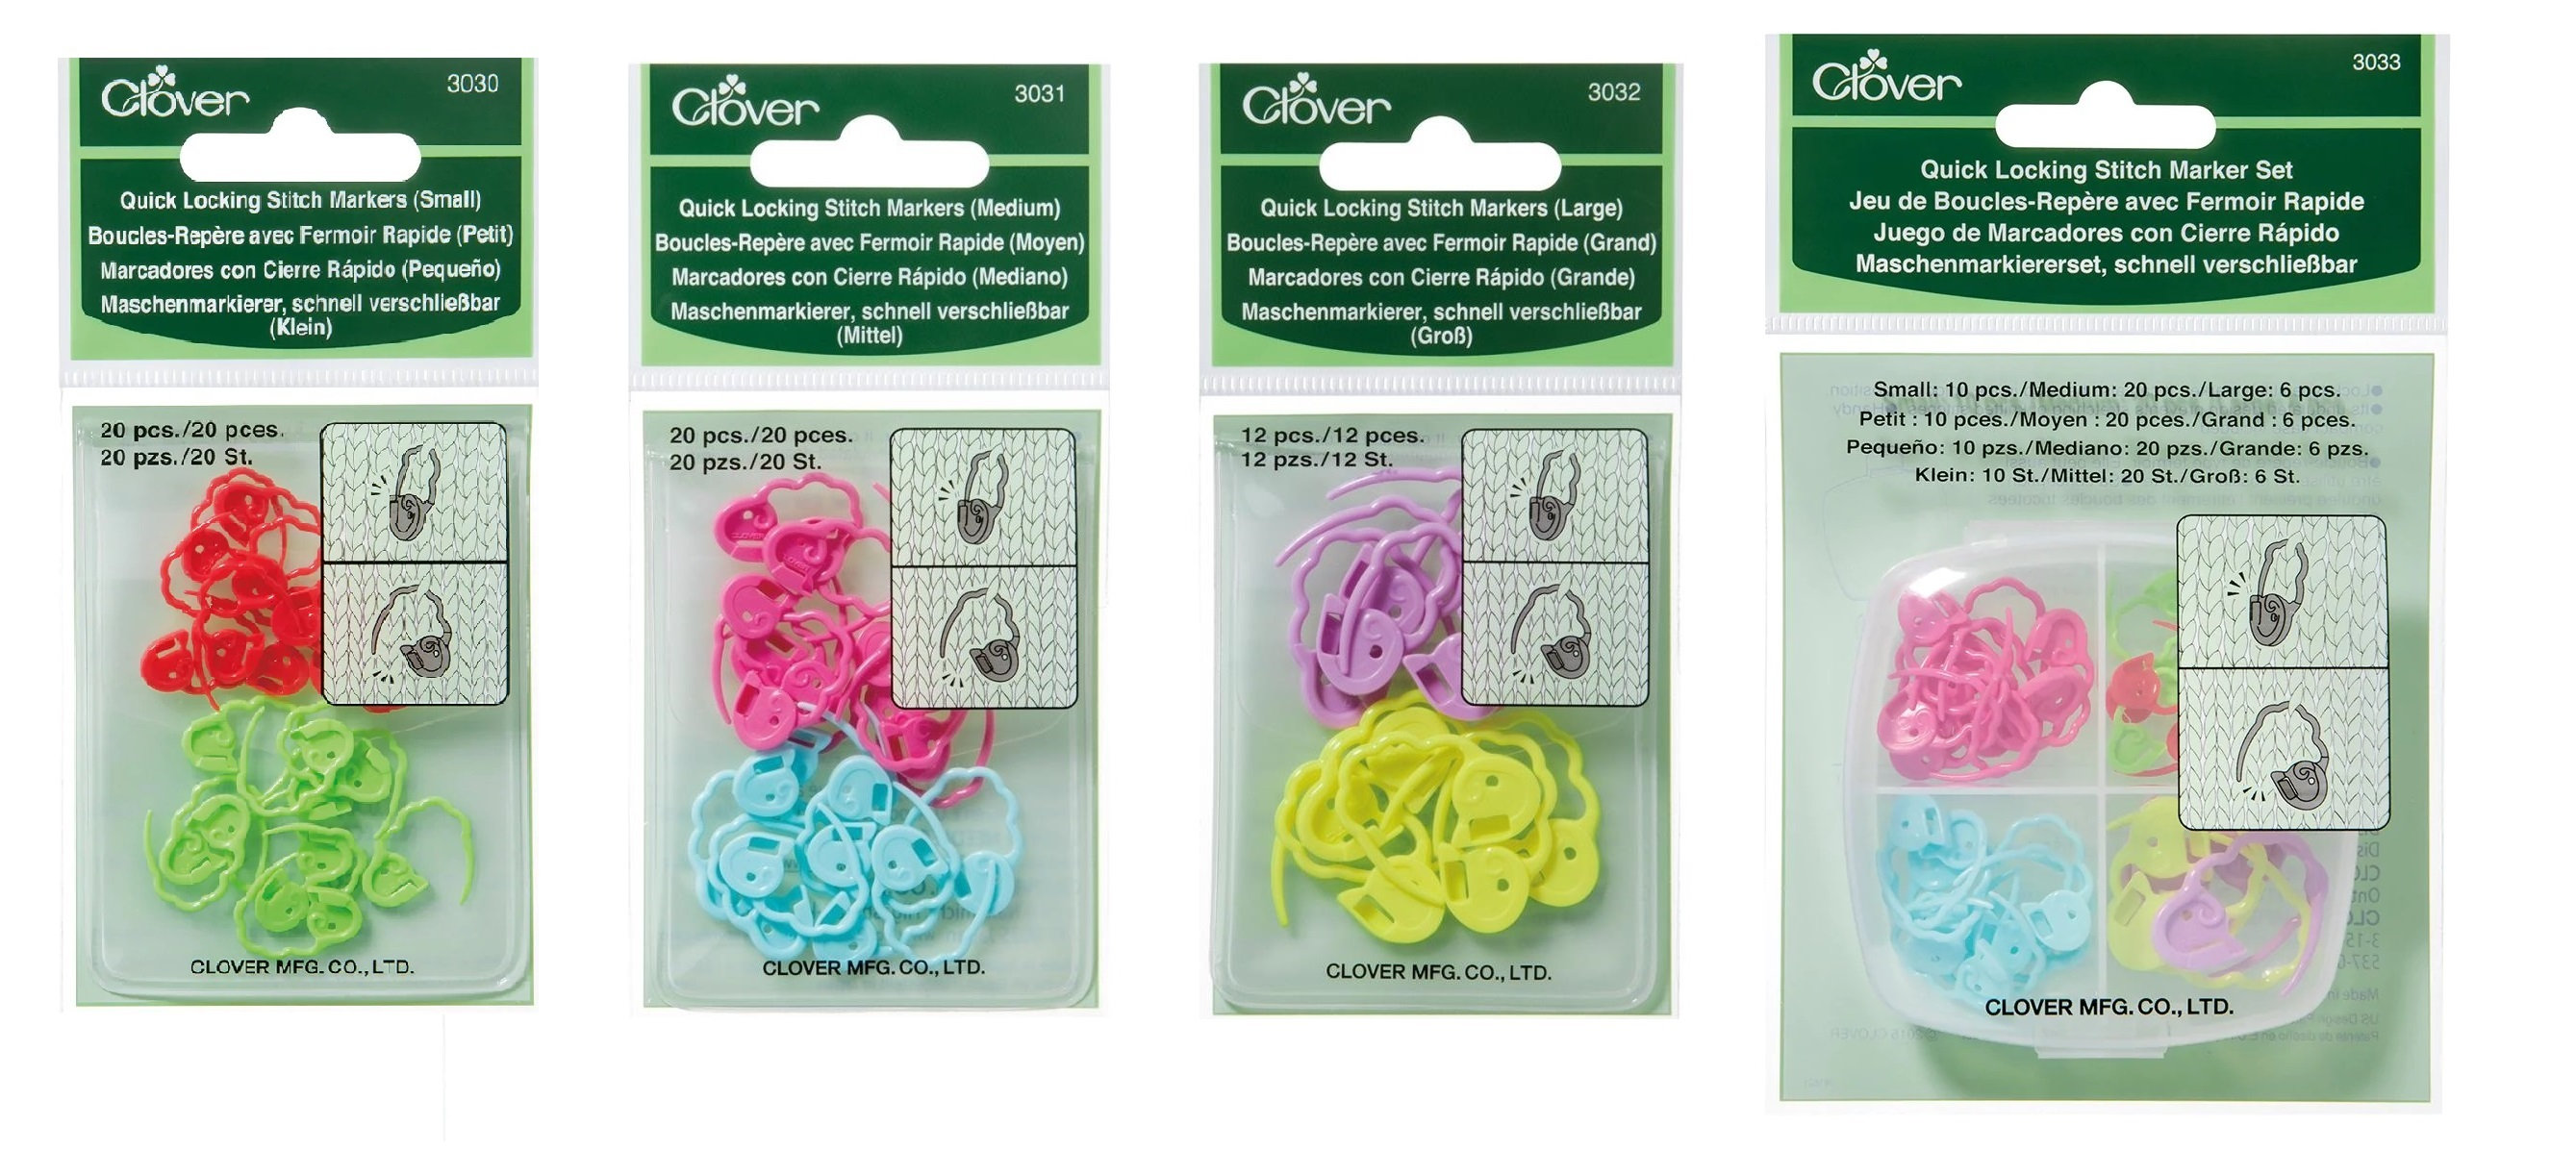 Quick Locking Stitch Markers Large by Clover